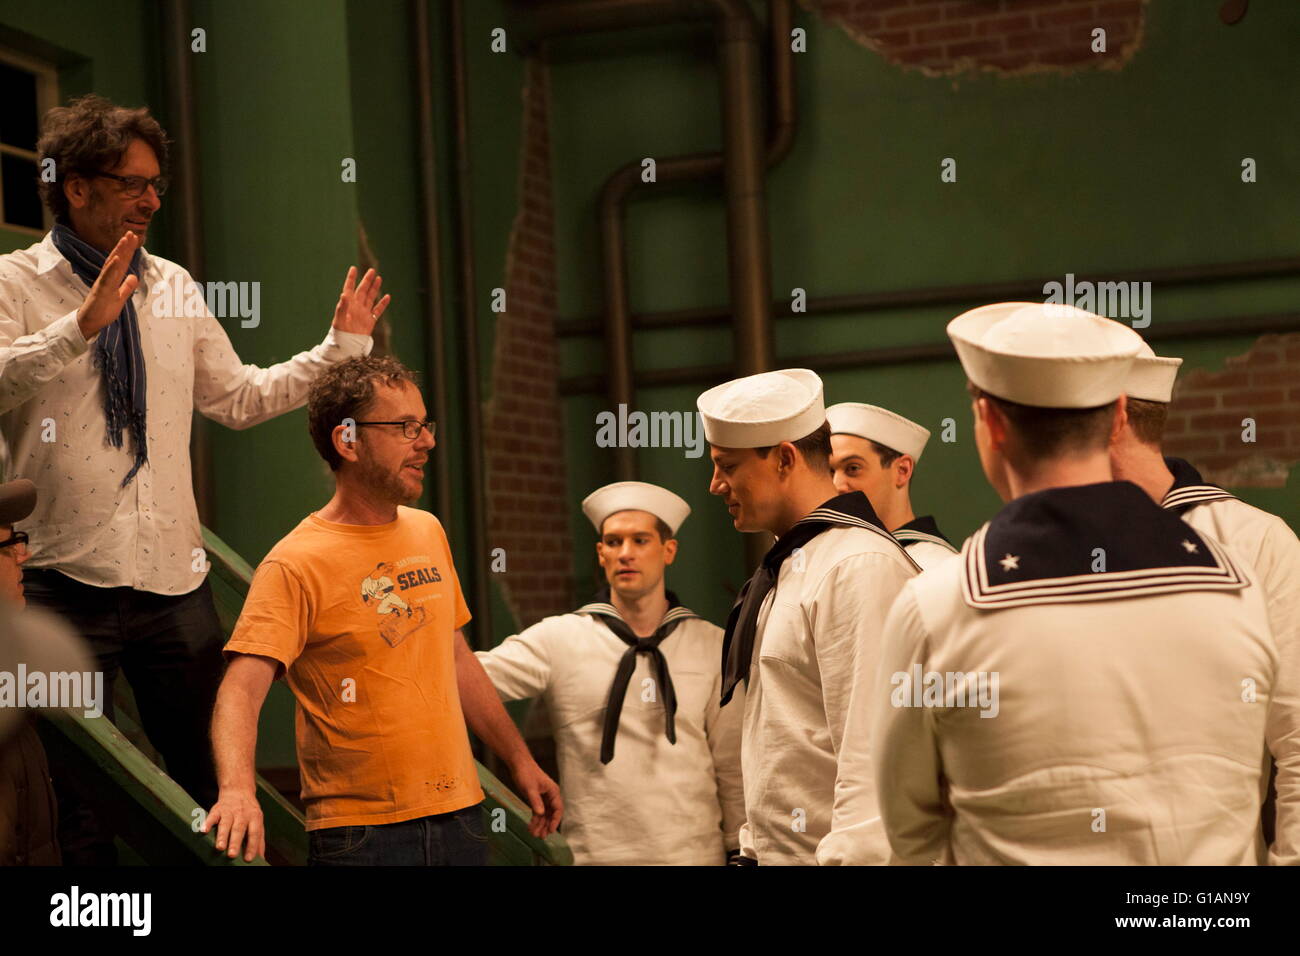 RELEASE DATE: February 5, 2016 TITLE: Hail, Caesar! STUDIO: Universal Pictures DIRECTOR: Ethan Coen, Joel Coen PLOT: A Hollywood fixer in the 1950s works to keep the studio's stars in line PICTURED: Ethan Coen, Joel Coen on set (Credit: c Universal Pictures/Entertainment Pictures/) Stock Photo